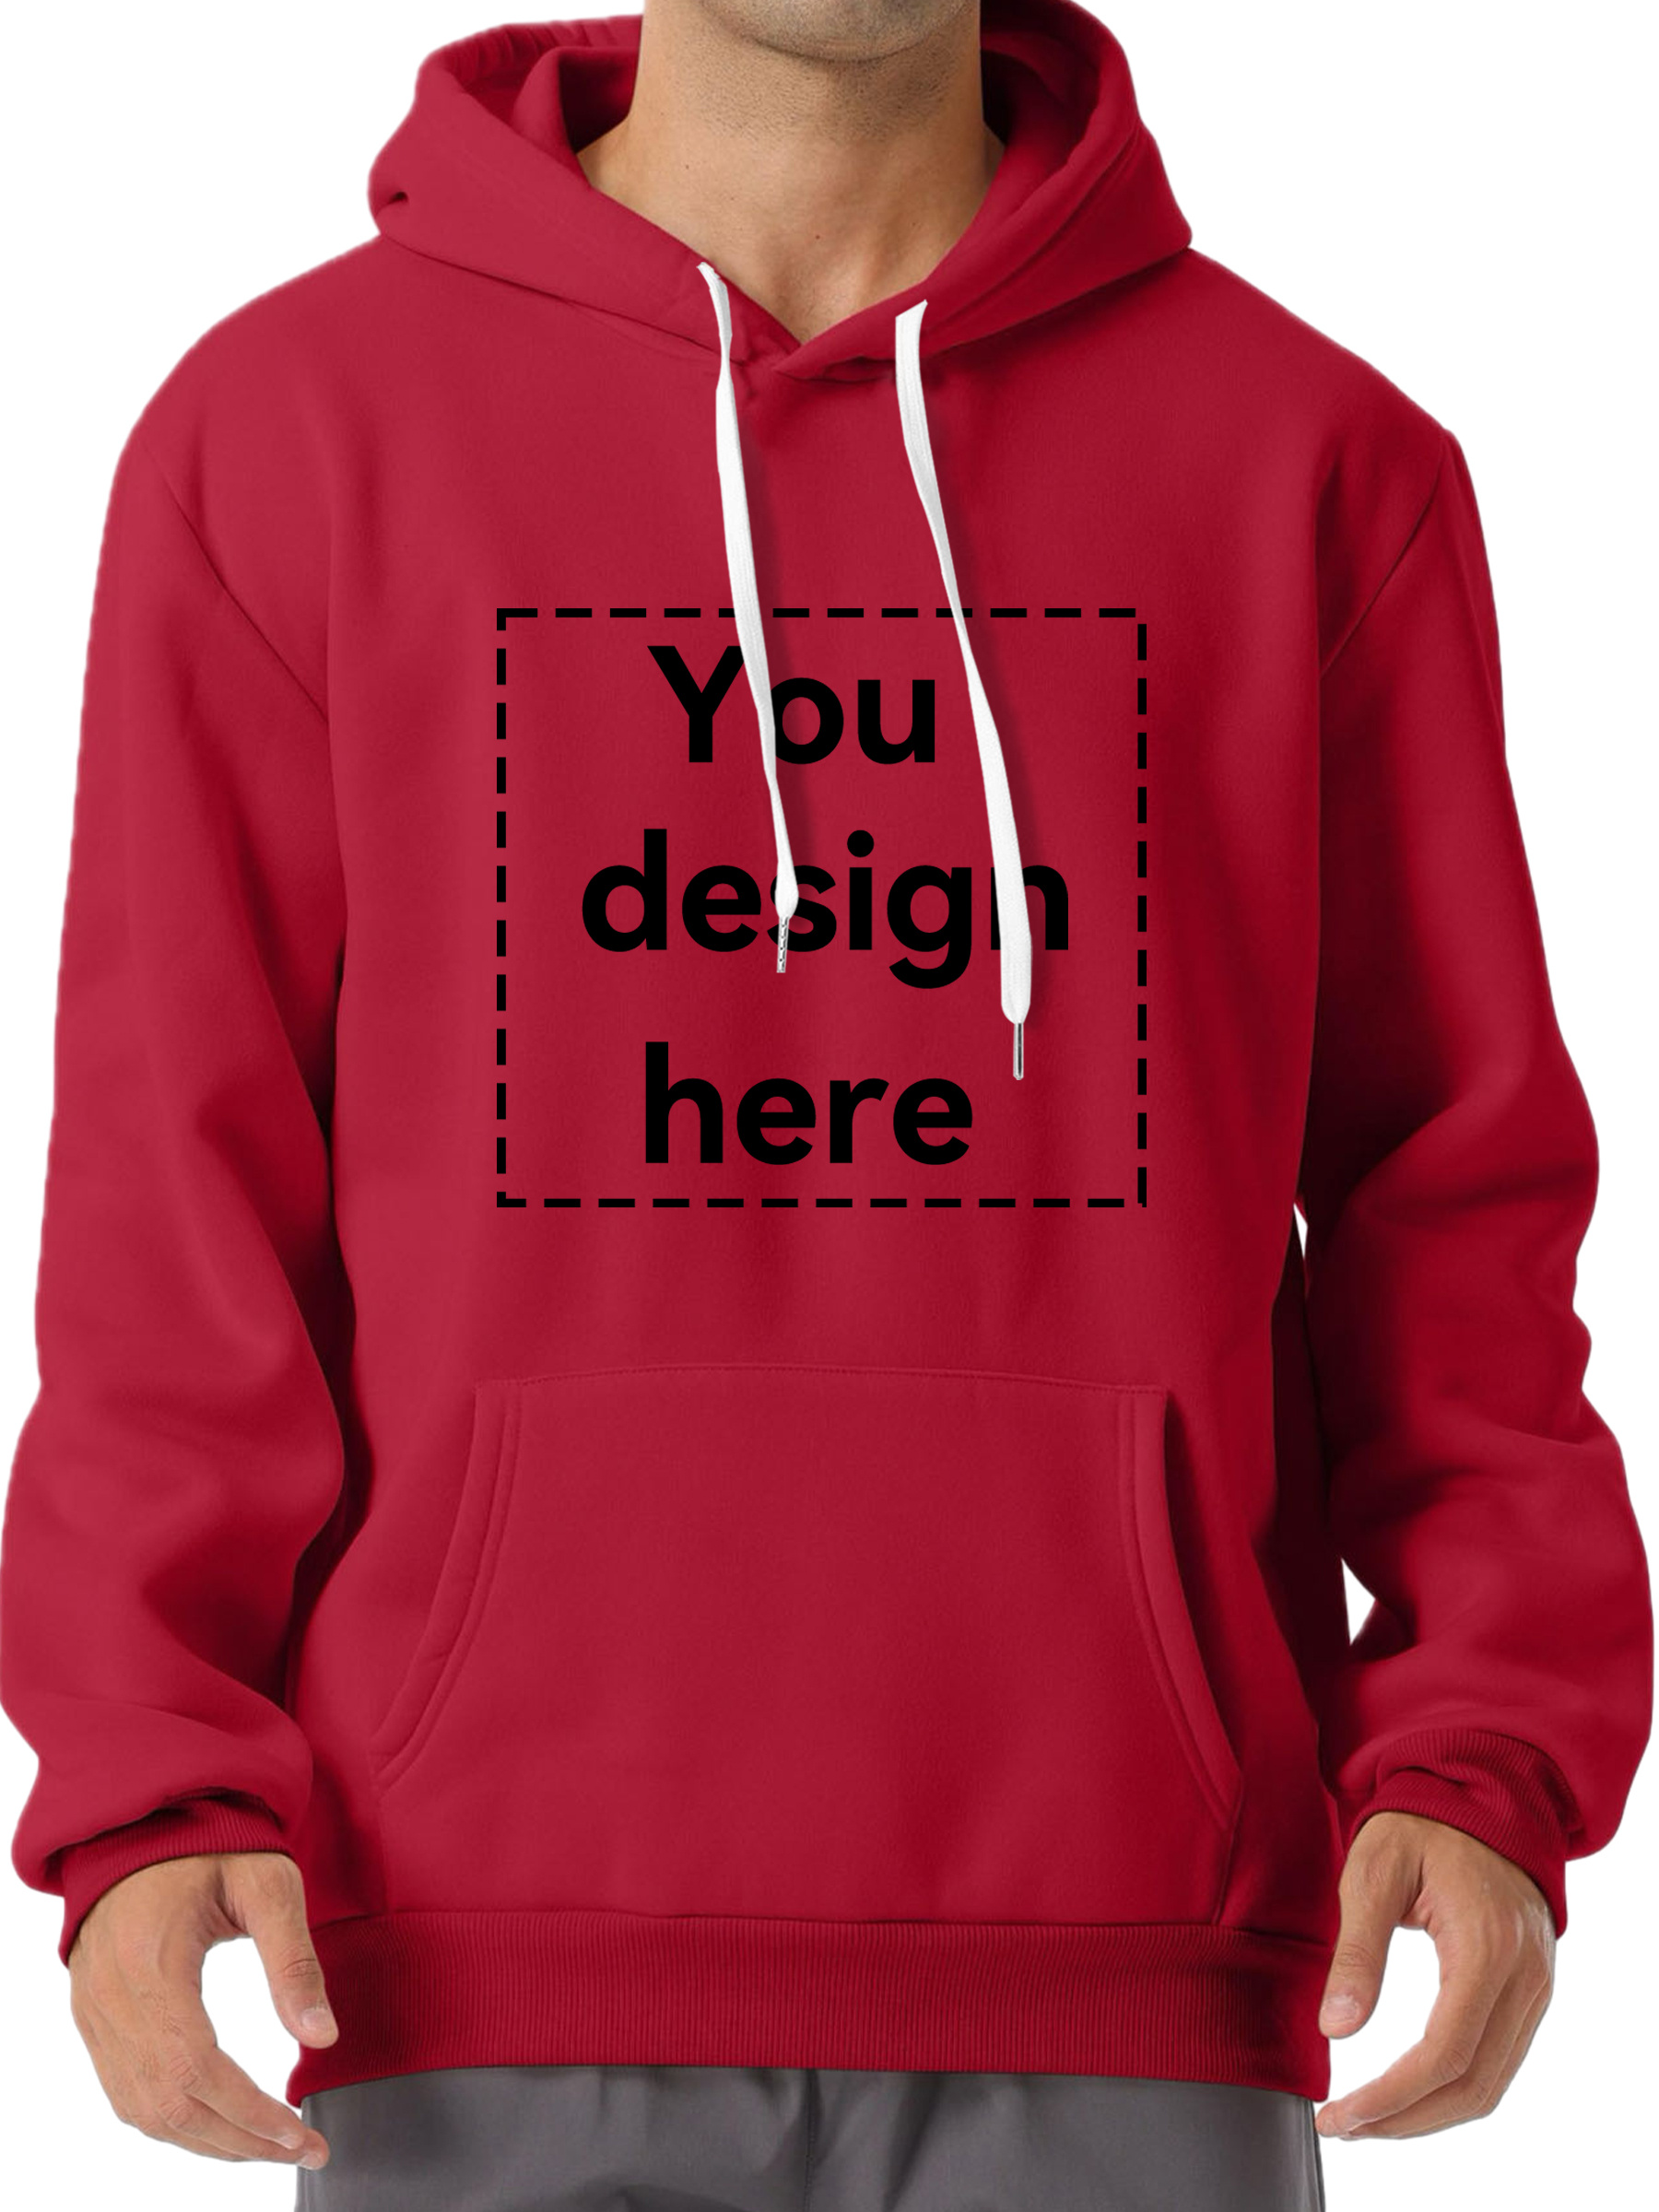 you design here letter print customized kangaroo pocket hoodie casual long sleeve hoodies pullover sweatshirt mens clothing for fall winter details 20